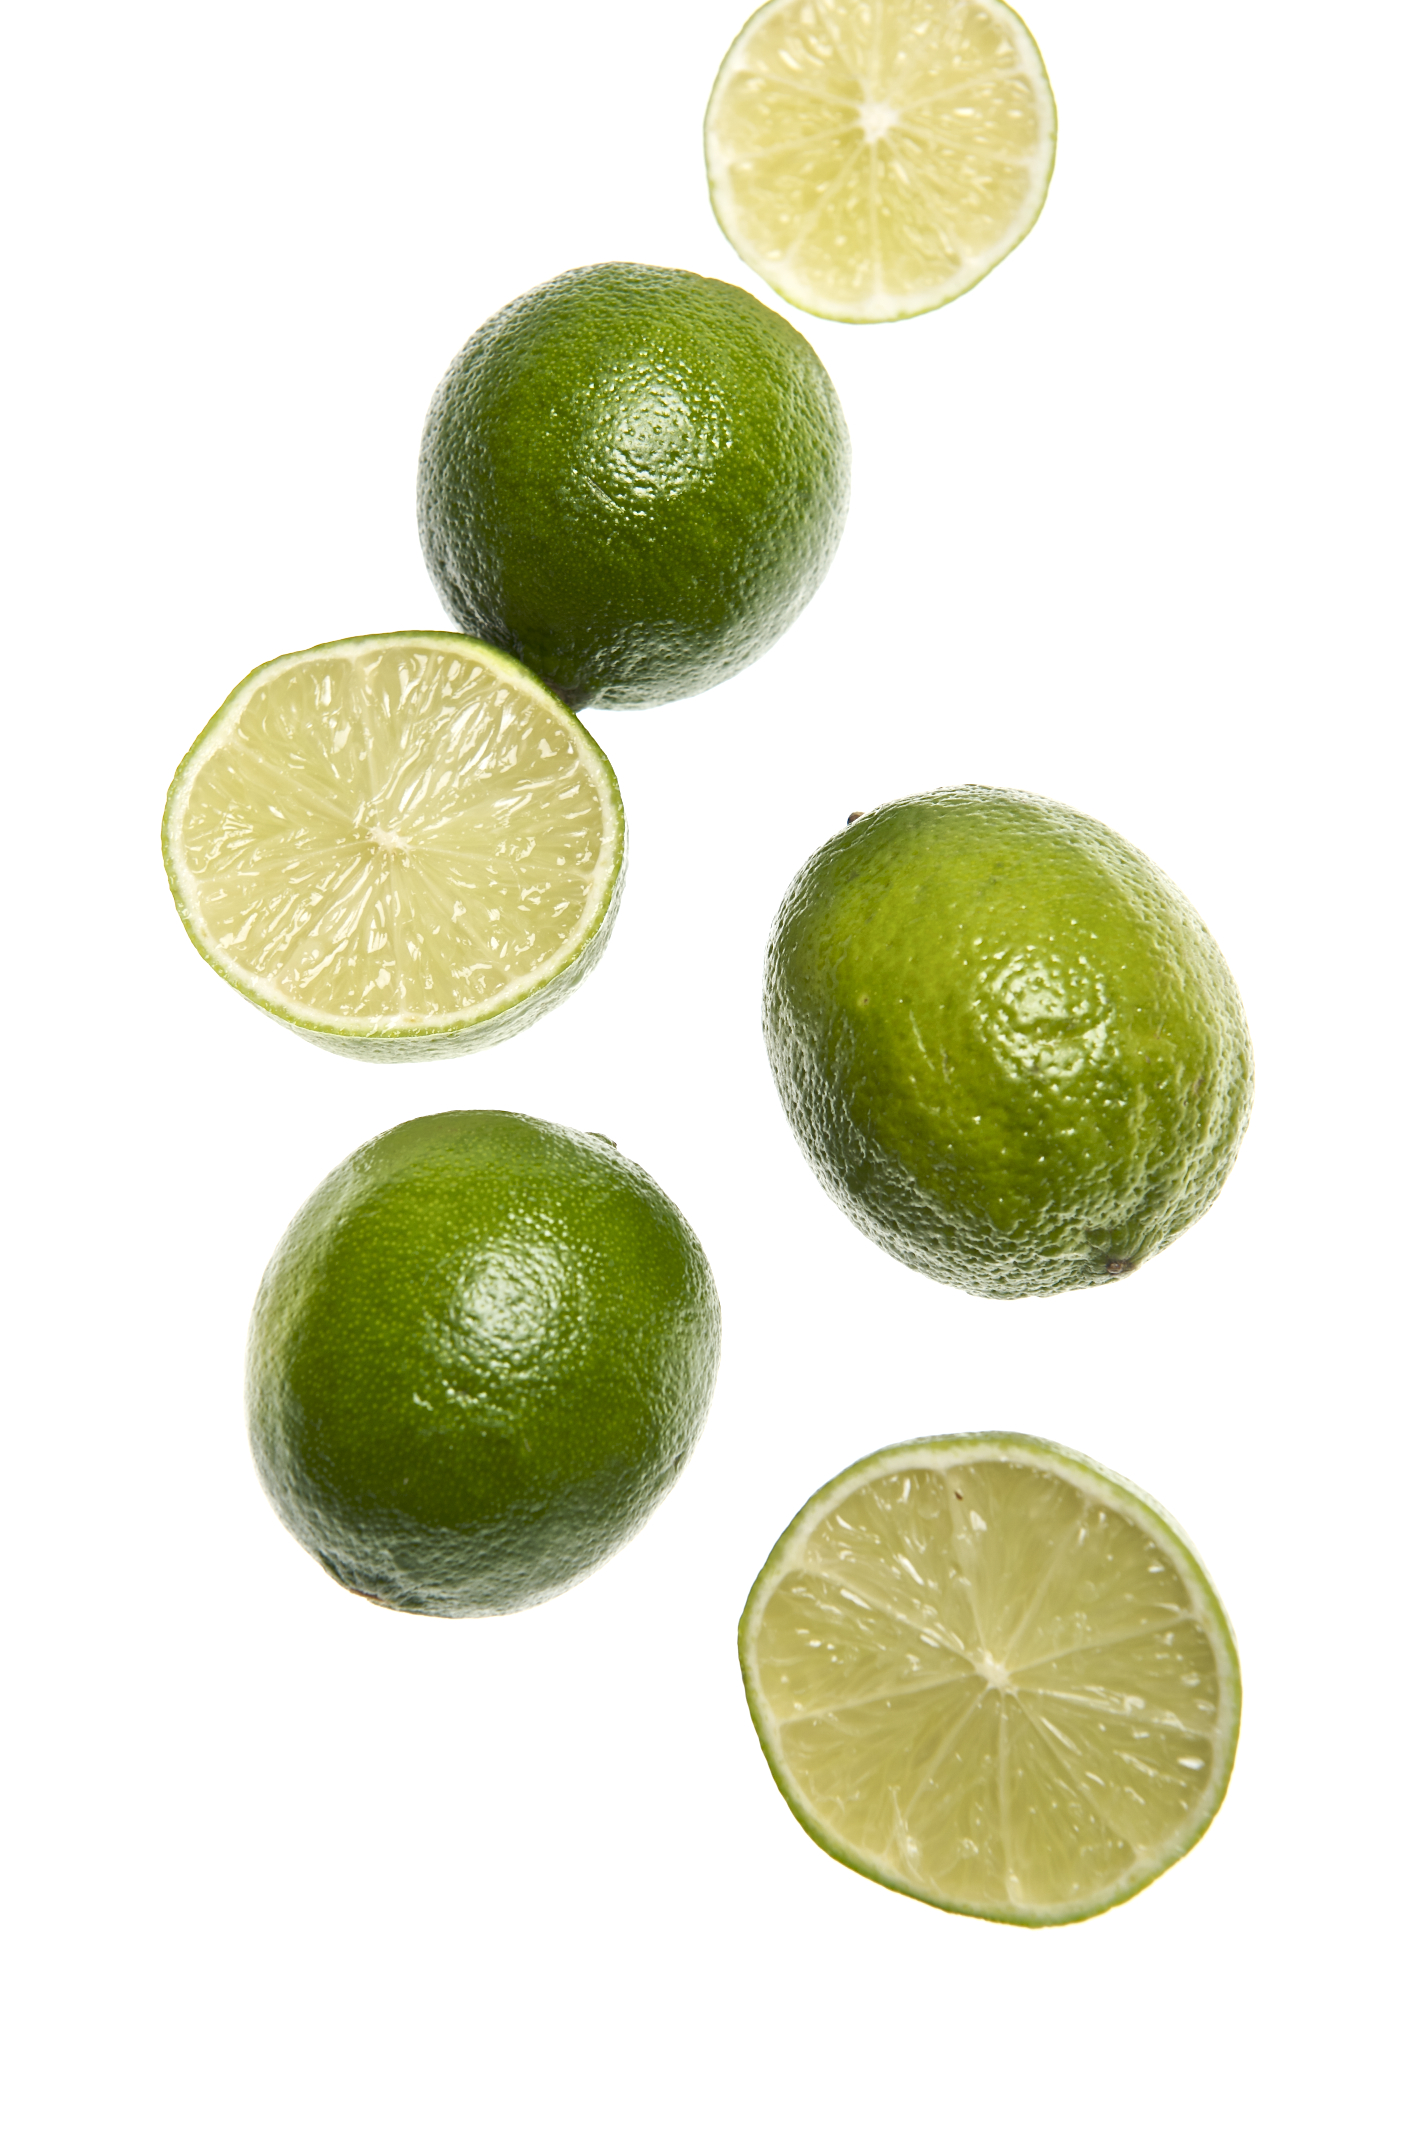 limes and half of the lime cut in half with one lemon on the side